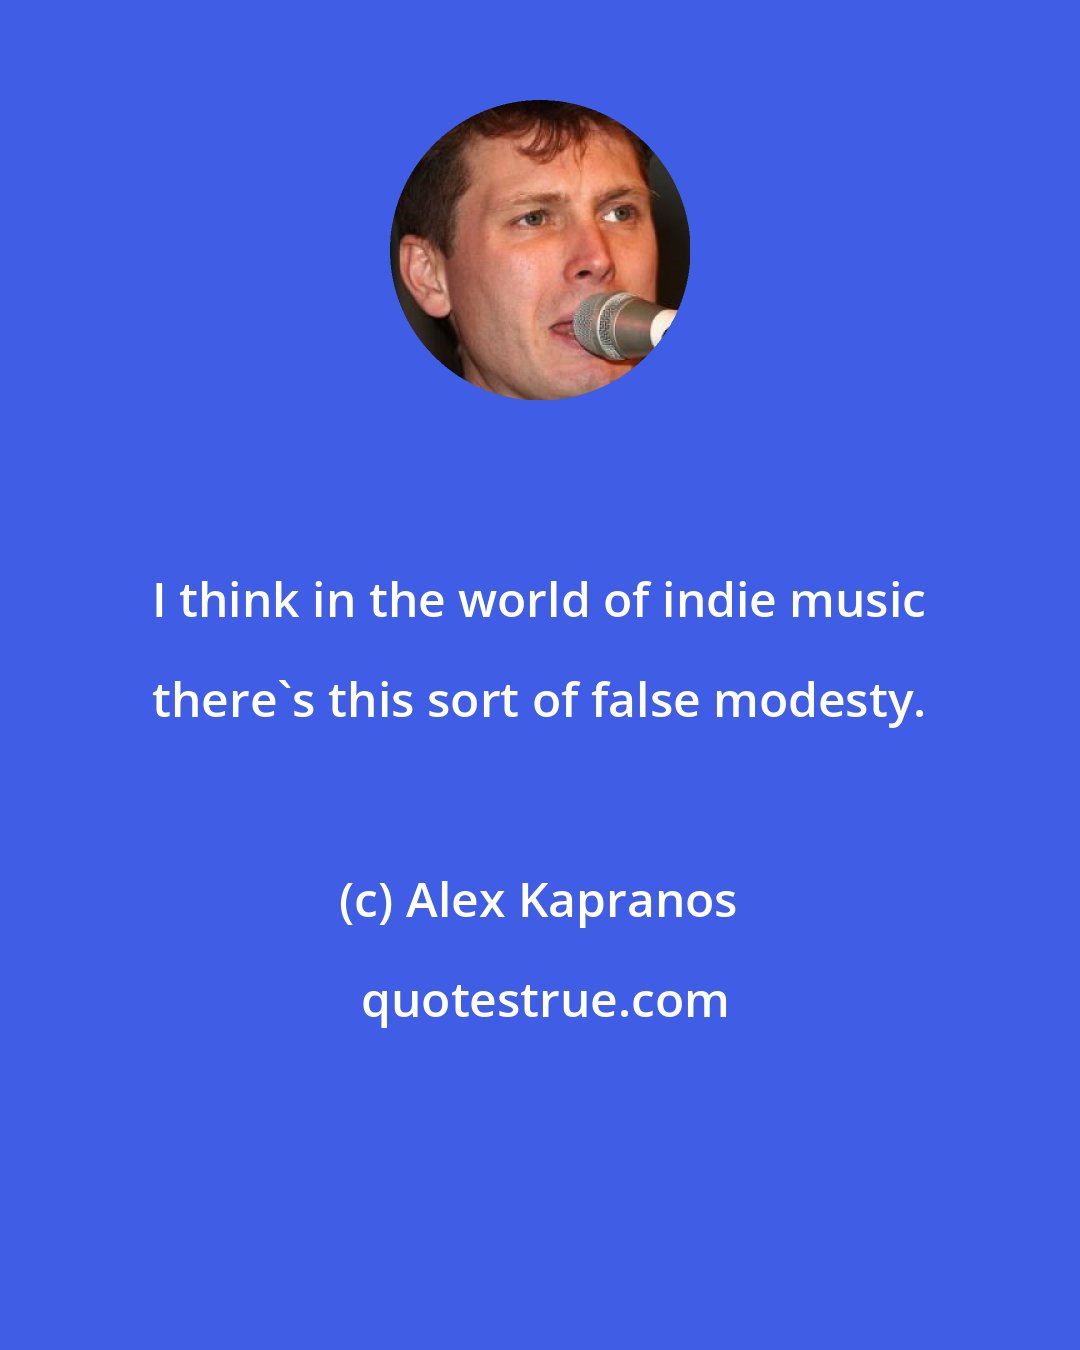 Alex Kapranos: I think in the world of indie music there's this sort of false modesty.